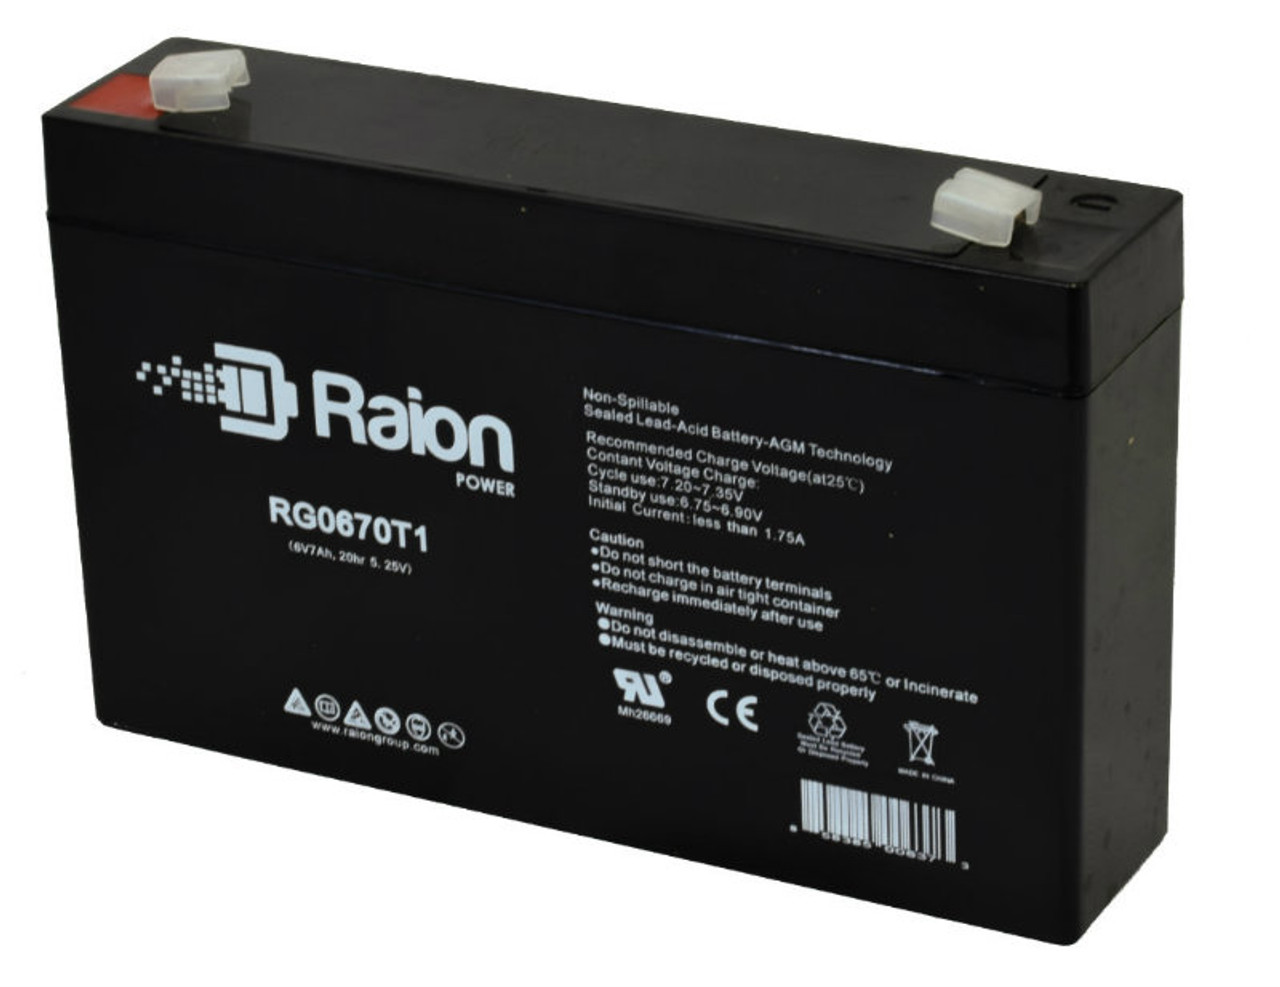 Raion Power RG0670T1 6V 7Ah Replacement Emergency Lighting Battery for Lithonia 6ELM2